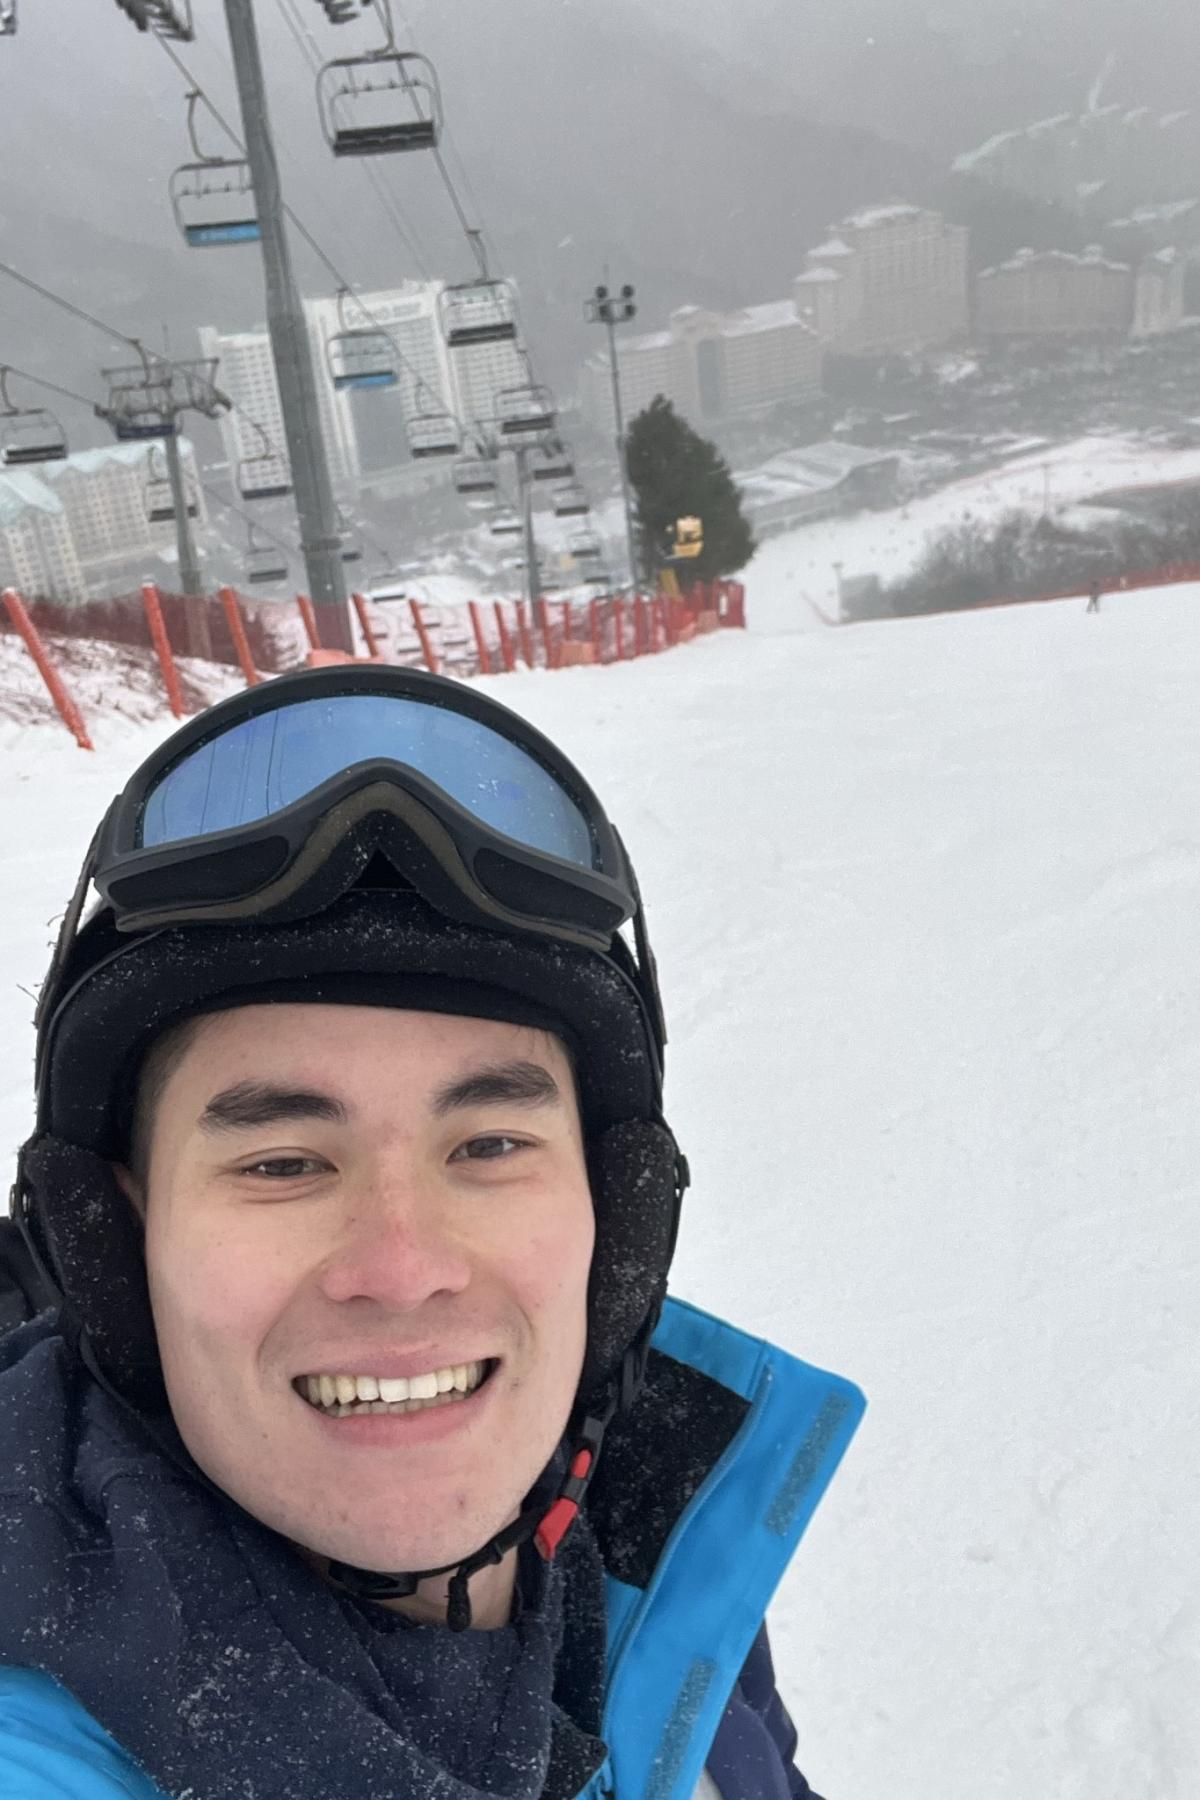 Rhys taking a selfie while skiing